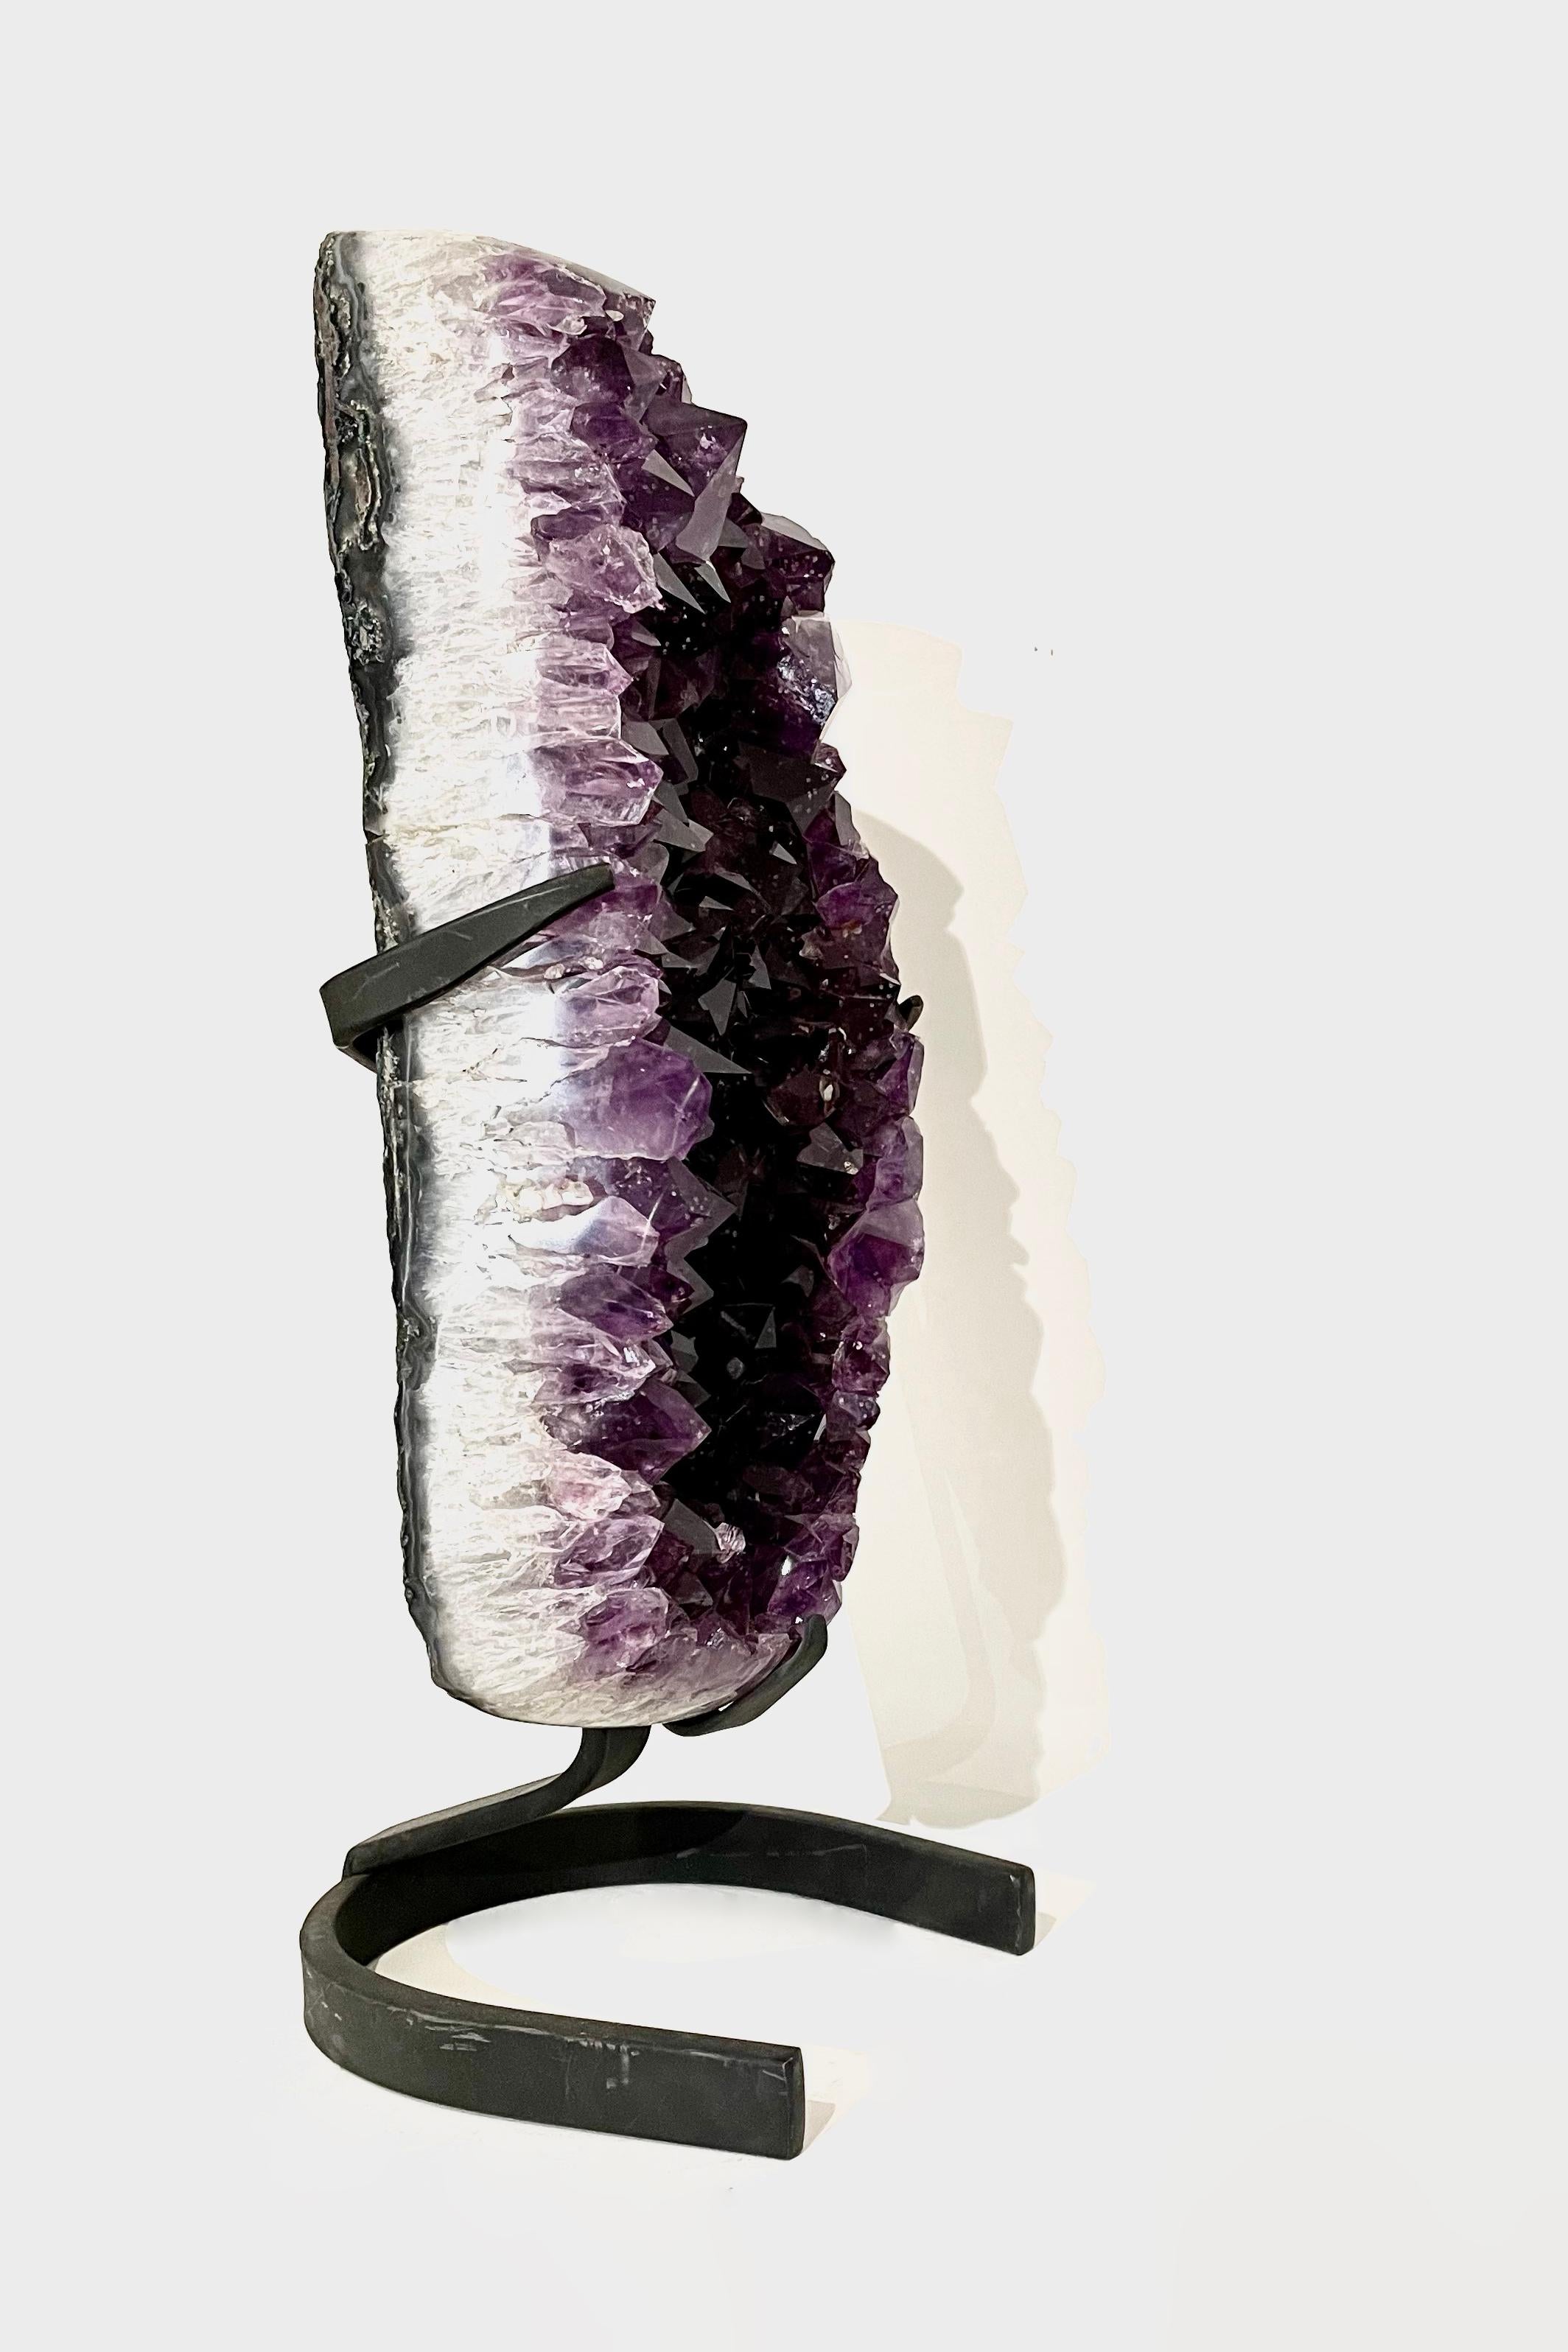 Amethyst crystal formation from Marabá, Brazil, Circa 50 million years old and in excellent condition. Complete with its own display stand. 

Dimensions: Approximately 50 x 16 x 10 cm

About E.O: From rare dinosaur skulls, crystals and Stone Age